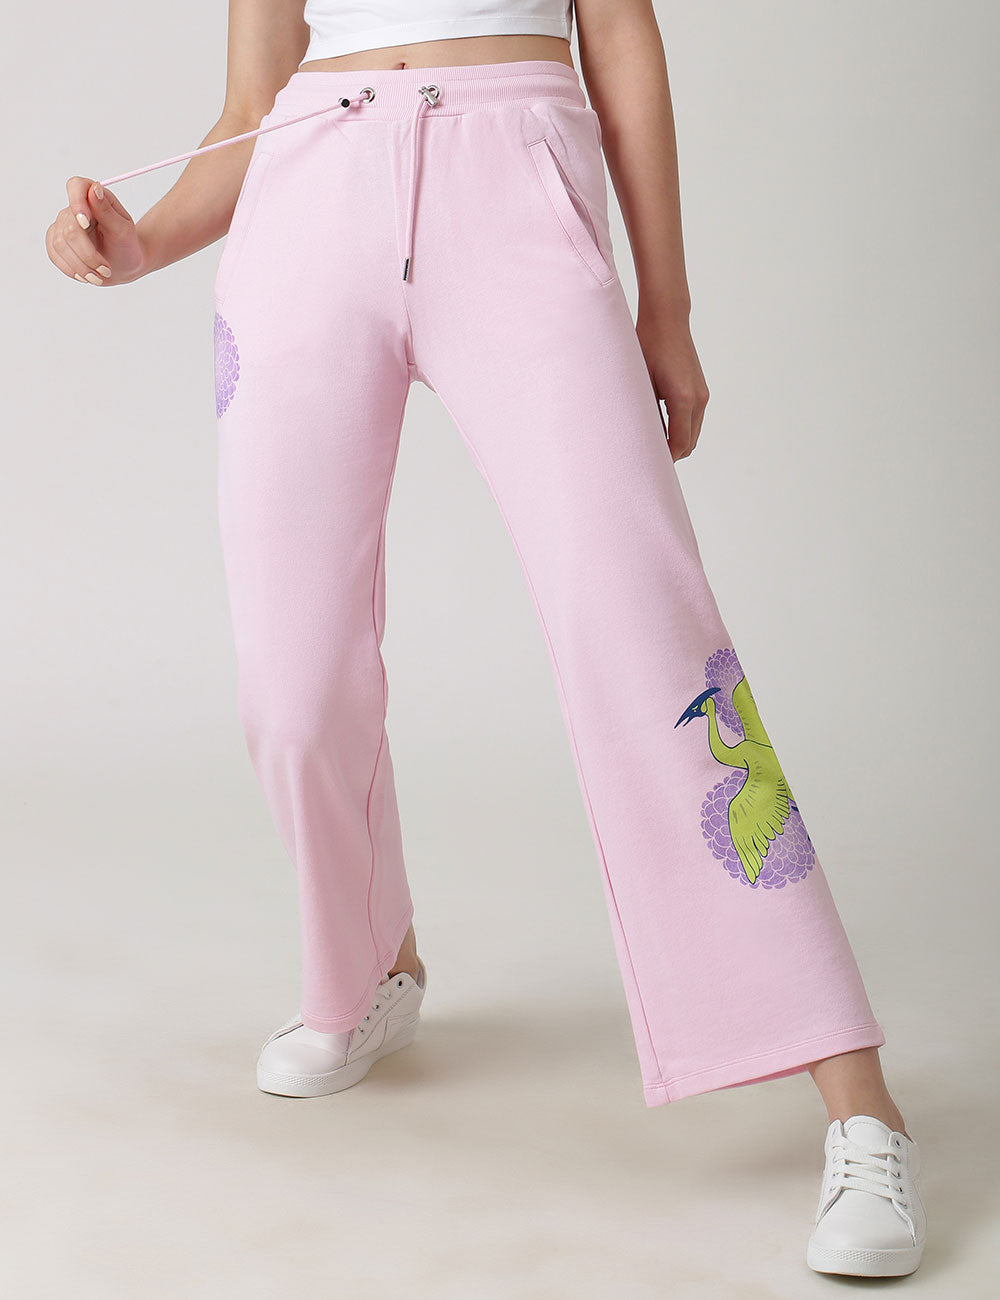 Buy Black Track Pants for Women by Outryt Sport Online | Ajio.com